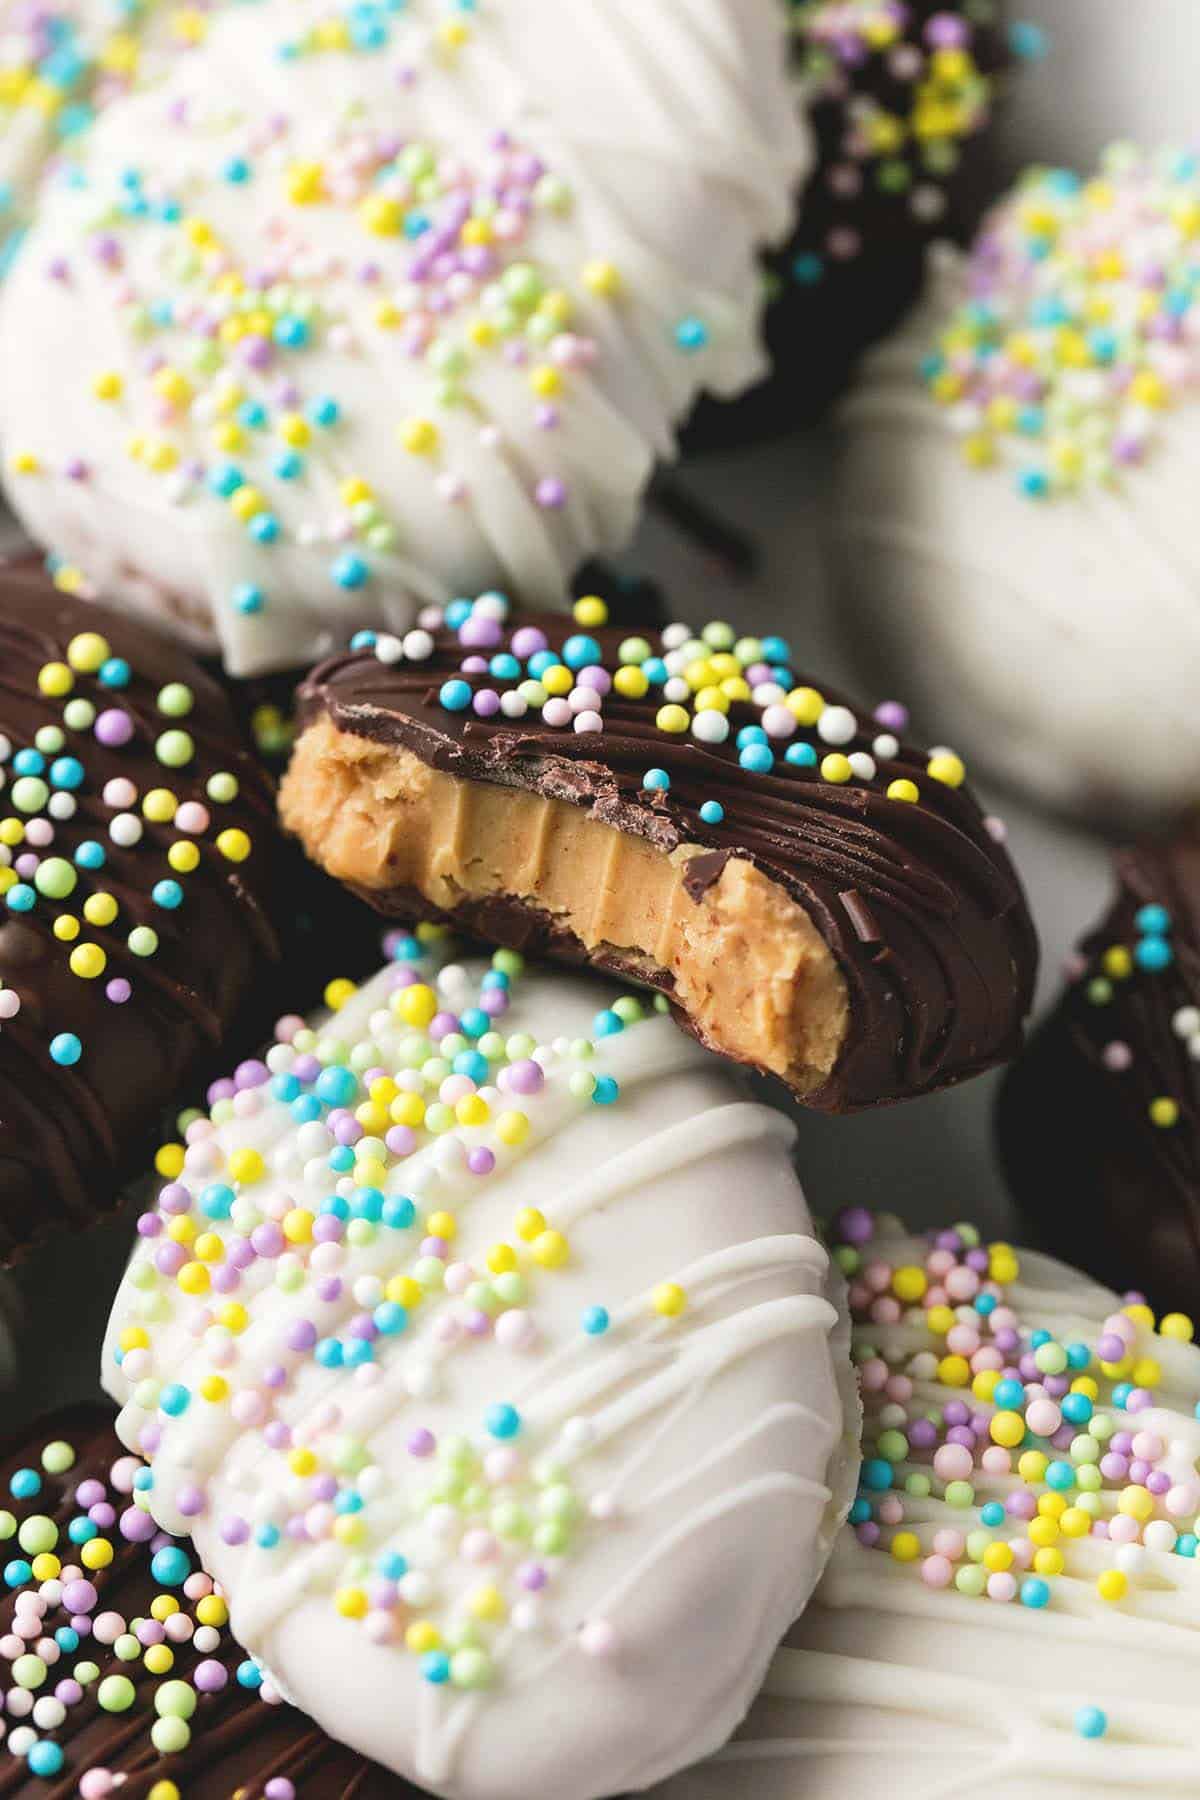 close up of a pile of copycat Reese's creamy peanut butter eggs both white and milk chocolate with sprinkles on top with the top milk chocolate egg missing a bite.